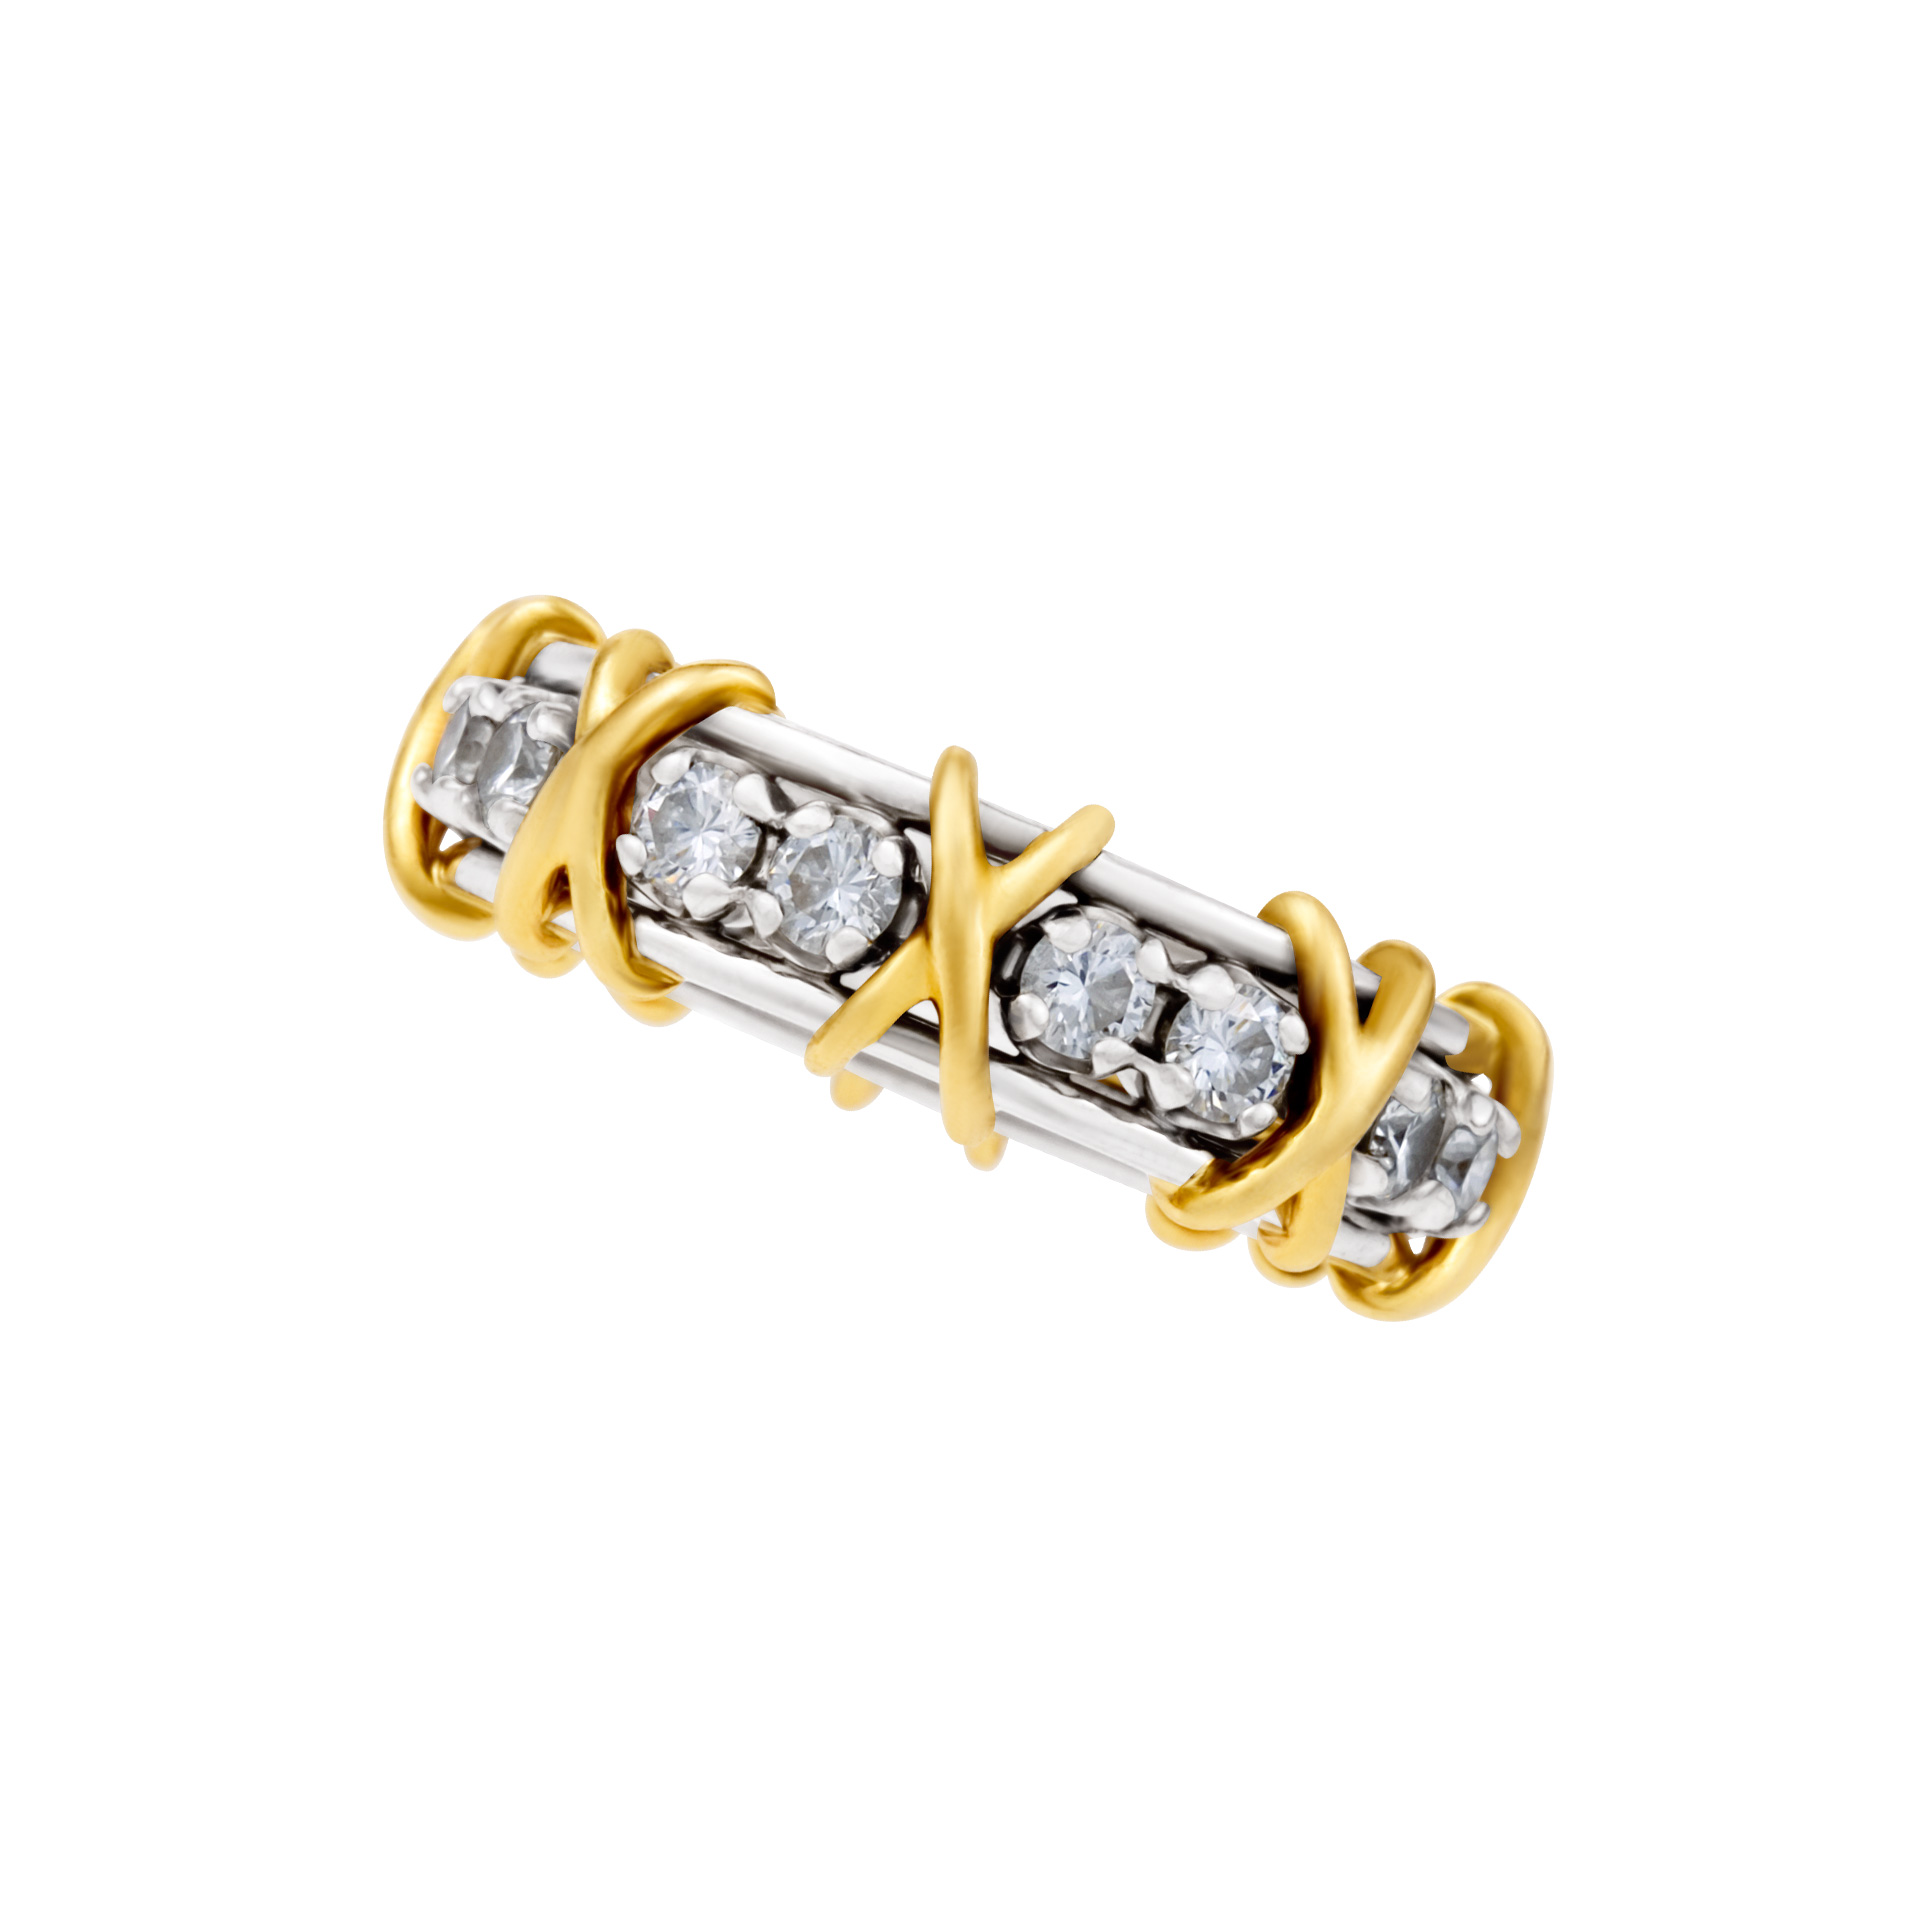 Tiffany & Co. Schlumberger "X' ring in platinum and 18k